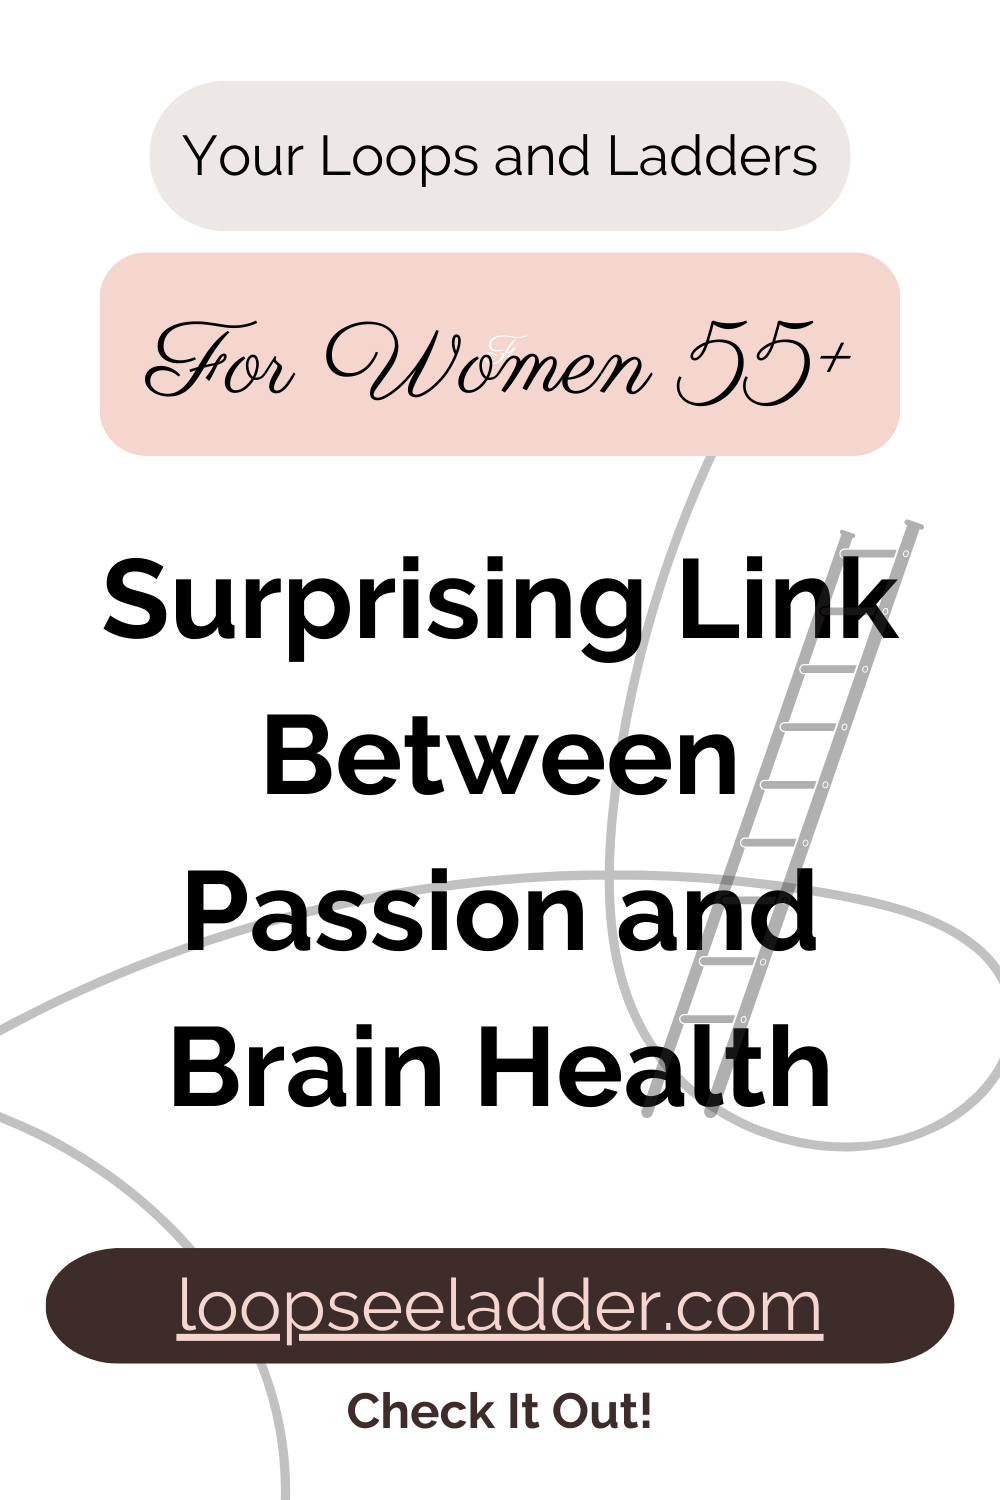 The Surprising Link Between Passion and Brain Health for Women 55+